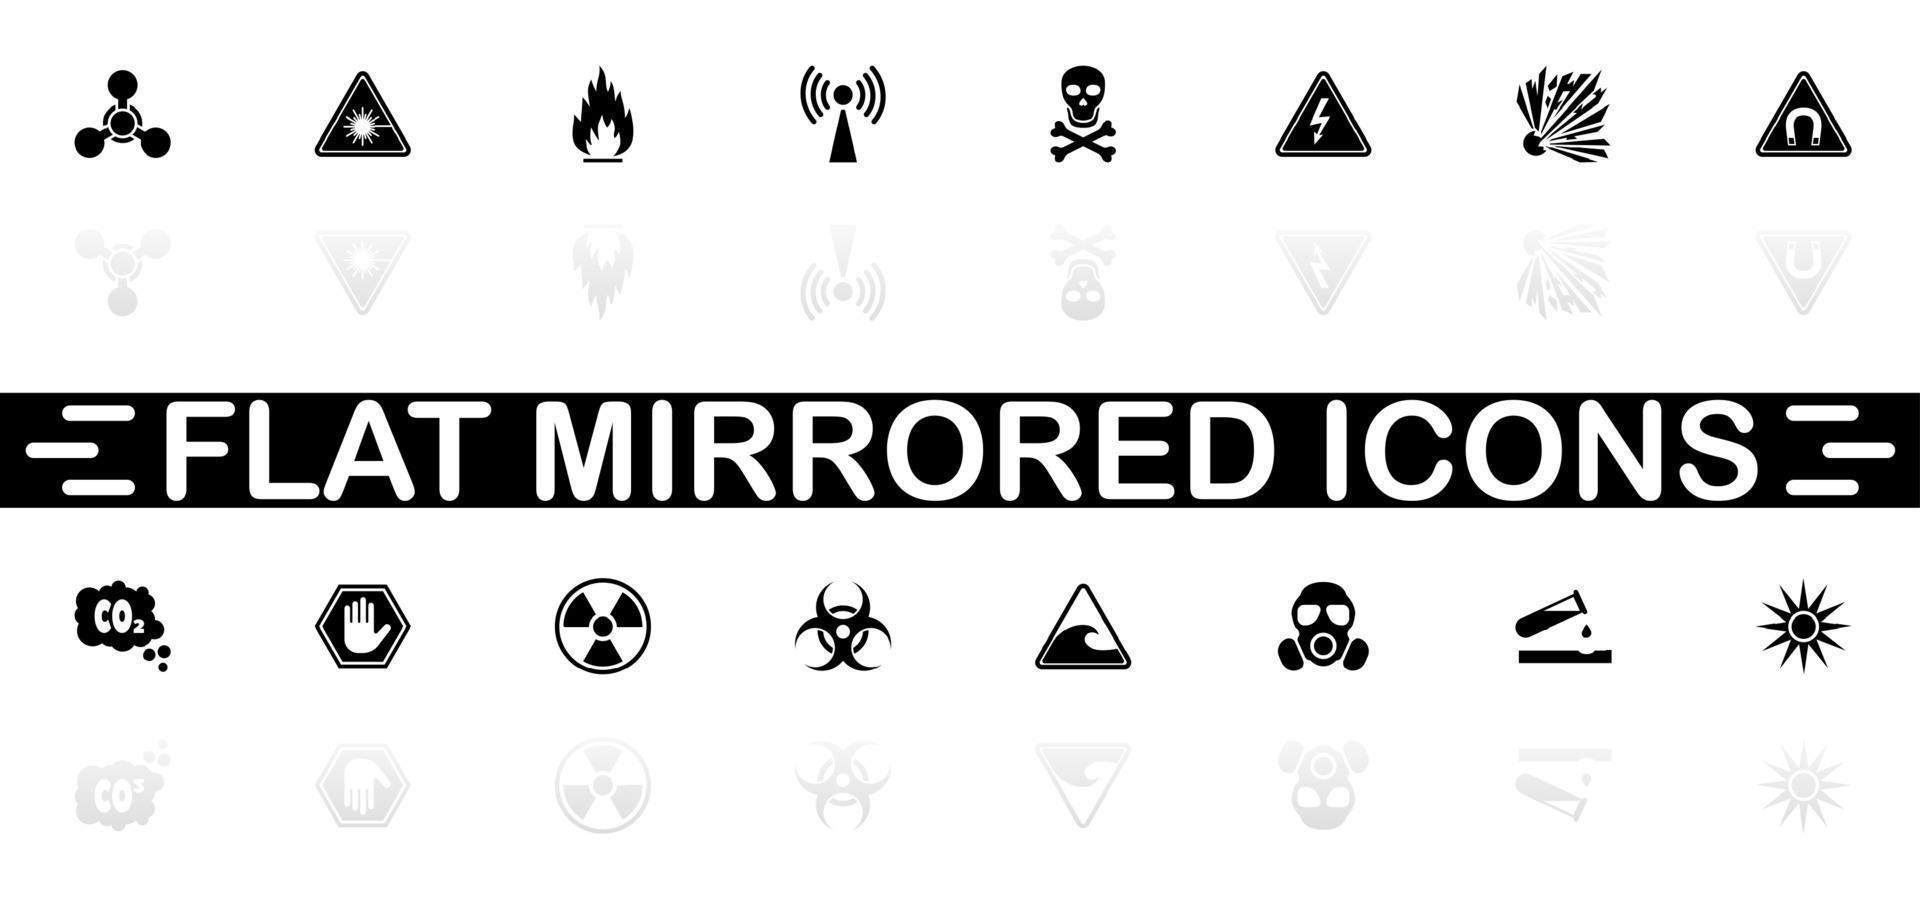 Danger icons - Black symbol on white background. Simple illustration. Flat Vector Icon. Mirror Reflection Shadow. Can be used in logo, web, mobile and UI UX project.